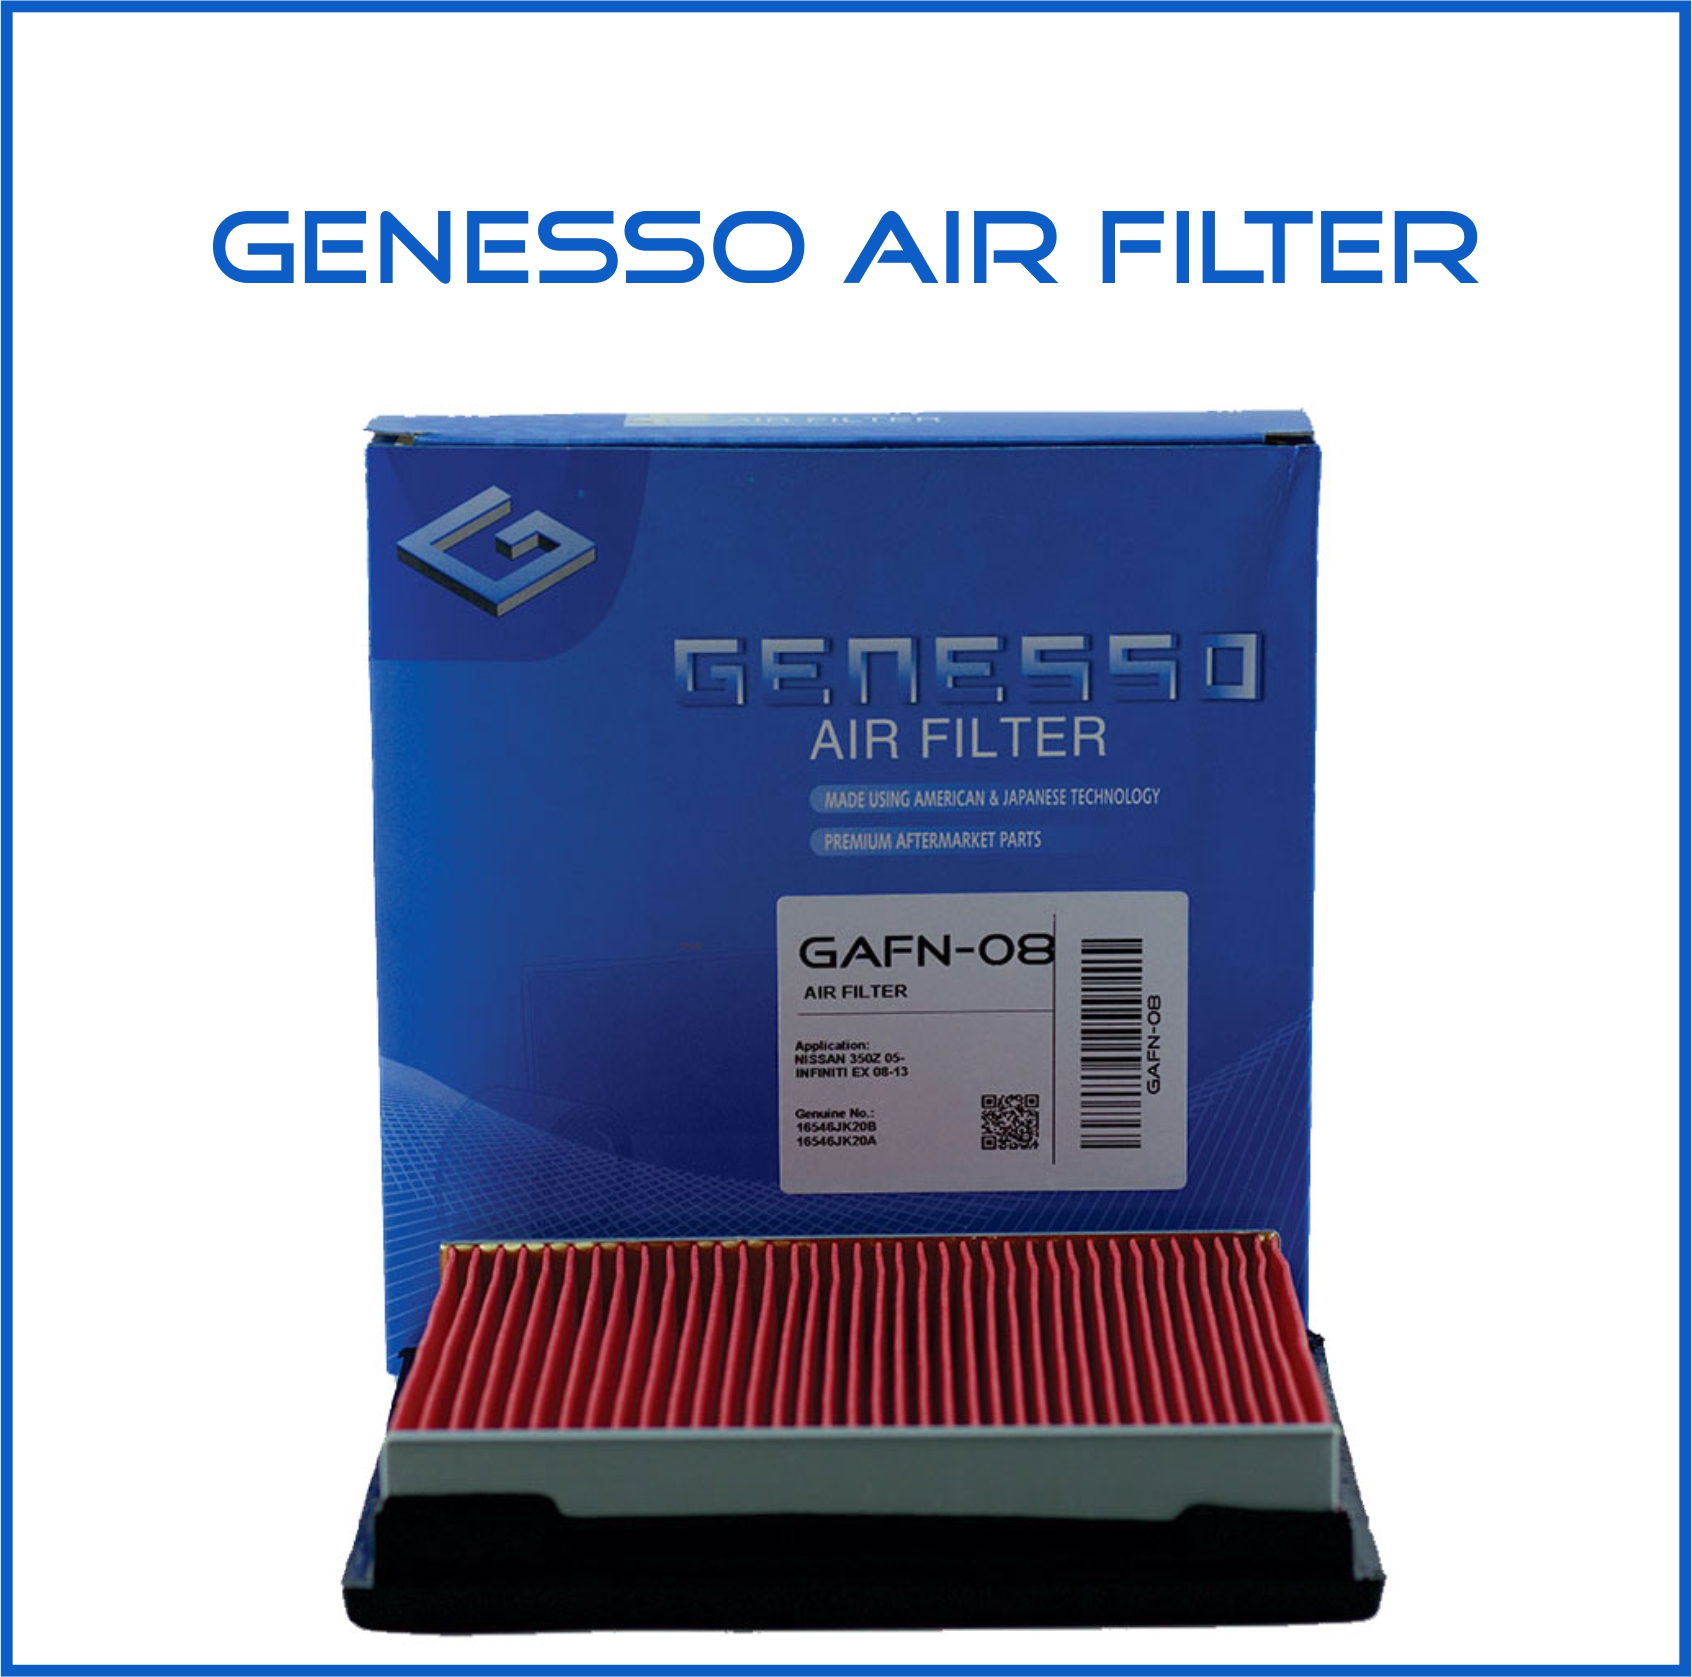 Genesso Air Filter